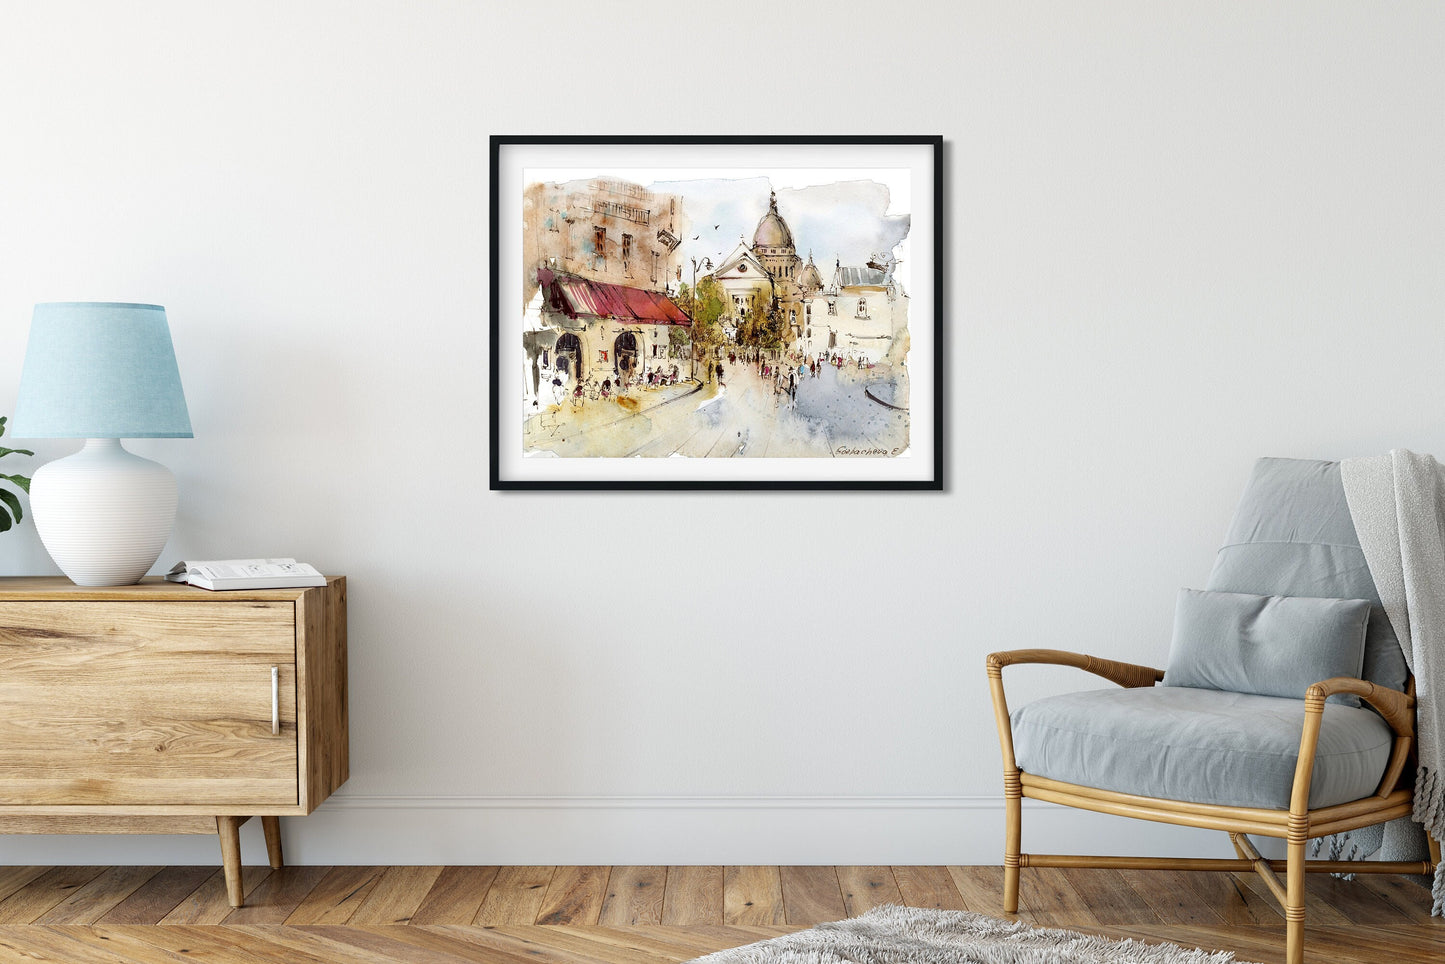 Paris Montmartre Art Print, Europe, France, Modern Architectural Wall Decor, Gift Ideas For Her, French Illustration